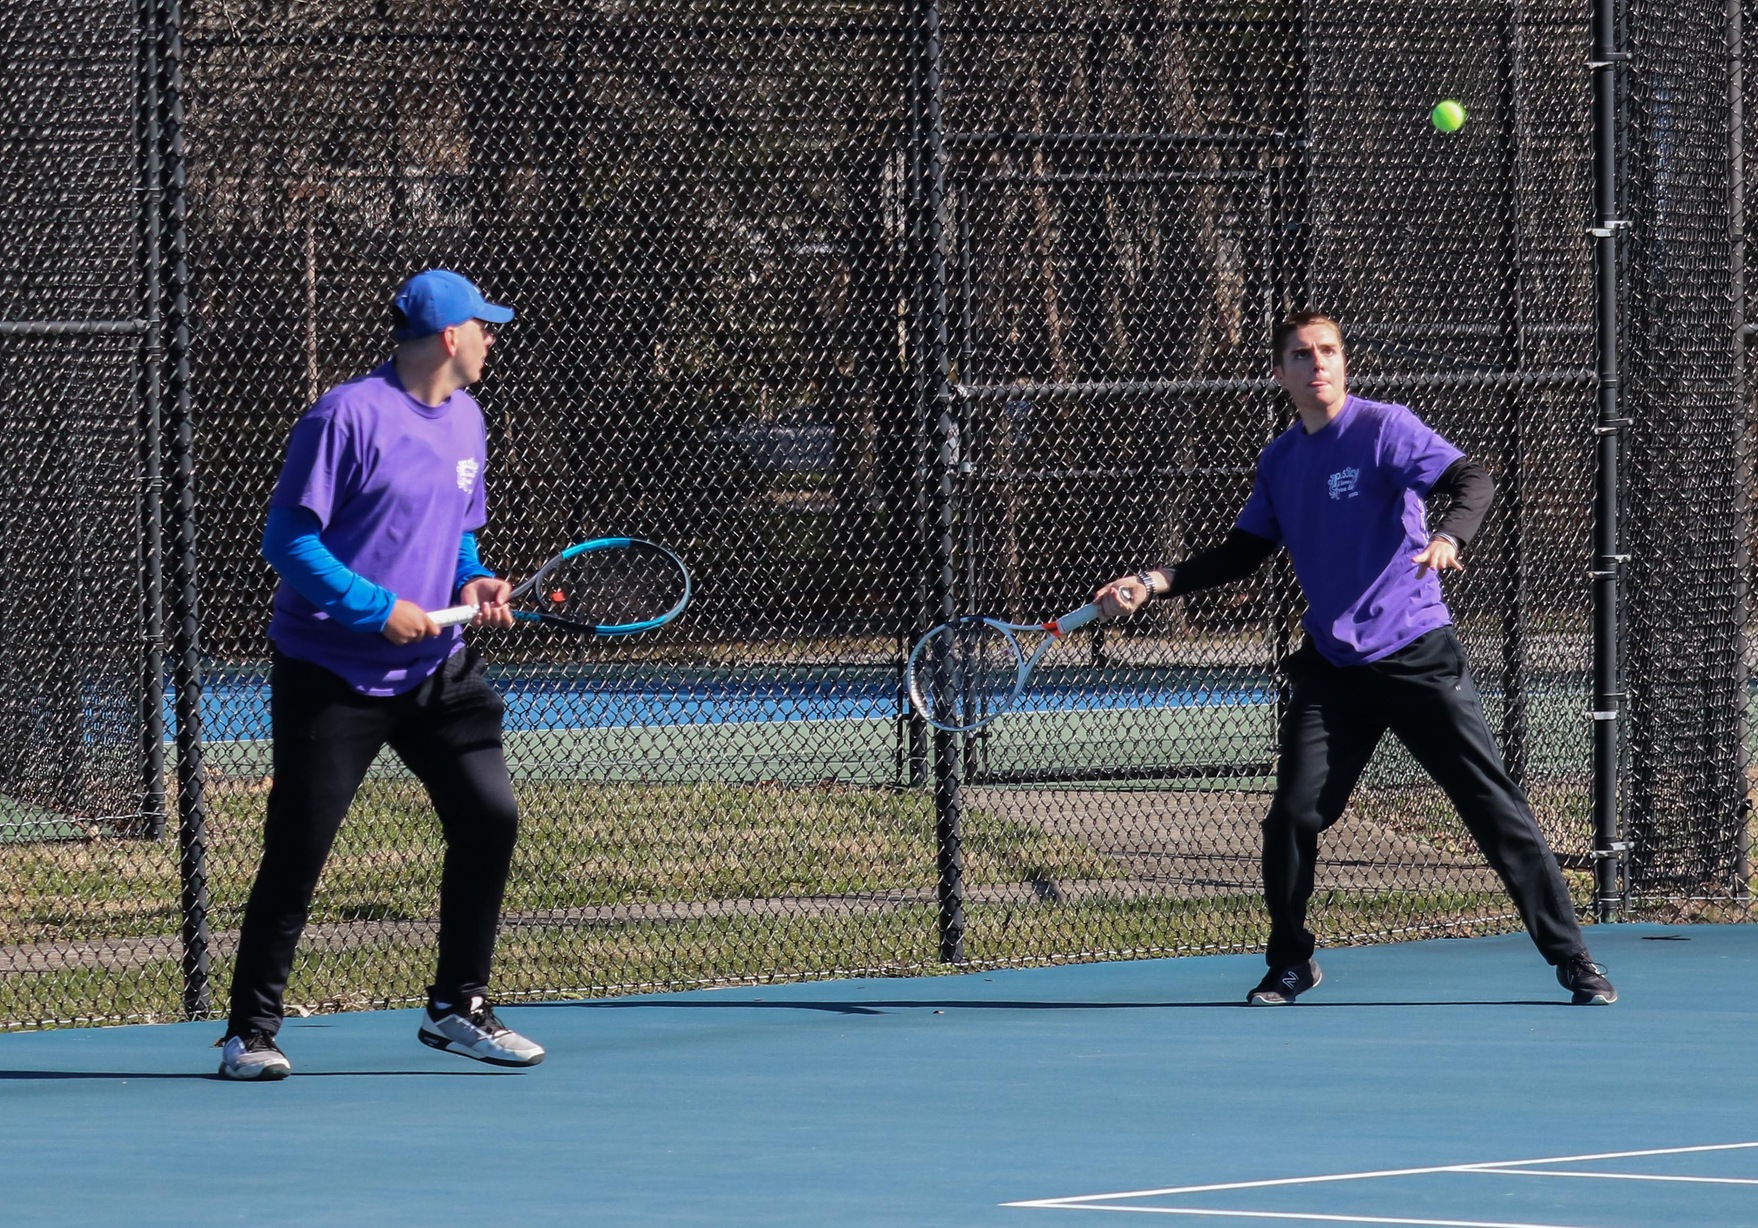 Andrew Ingram (left) and Troy Broska (right) in action at the McCoy Tennis Complex (Photo courtesy of Don Lander).